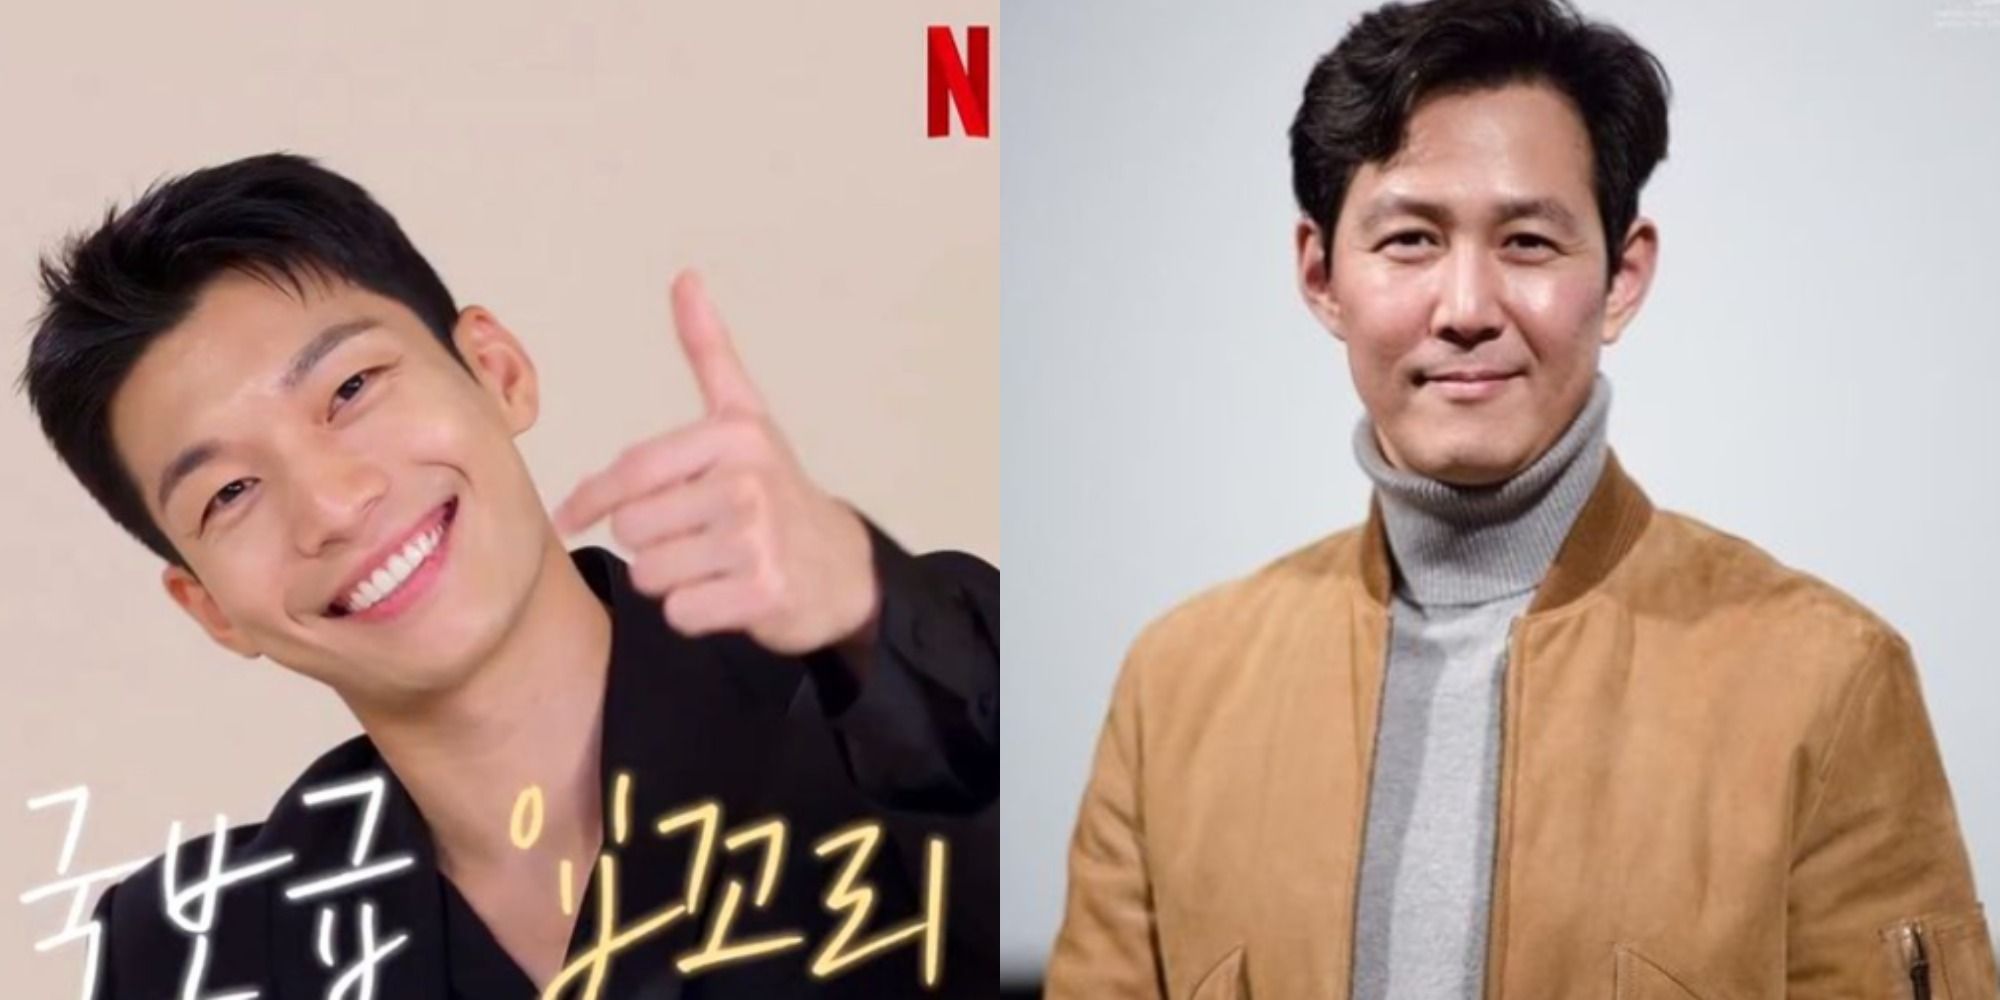 Two side by side images of actors from Squid Game: Wi-ha Joon and Lee-Jung Jae